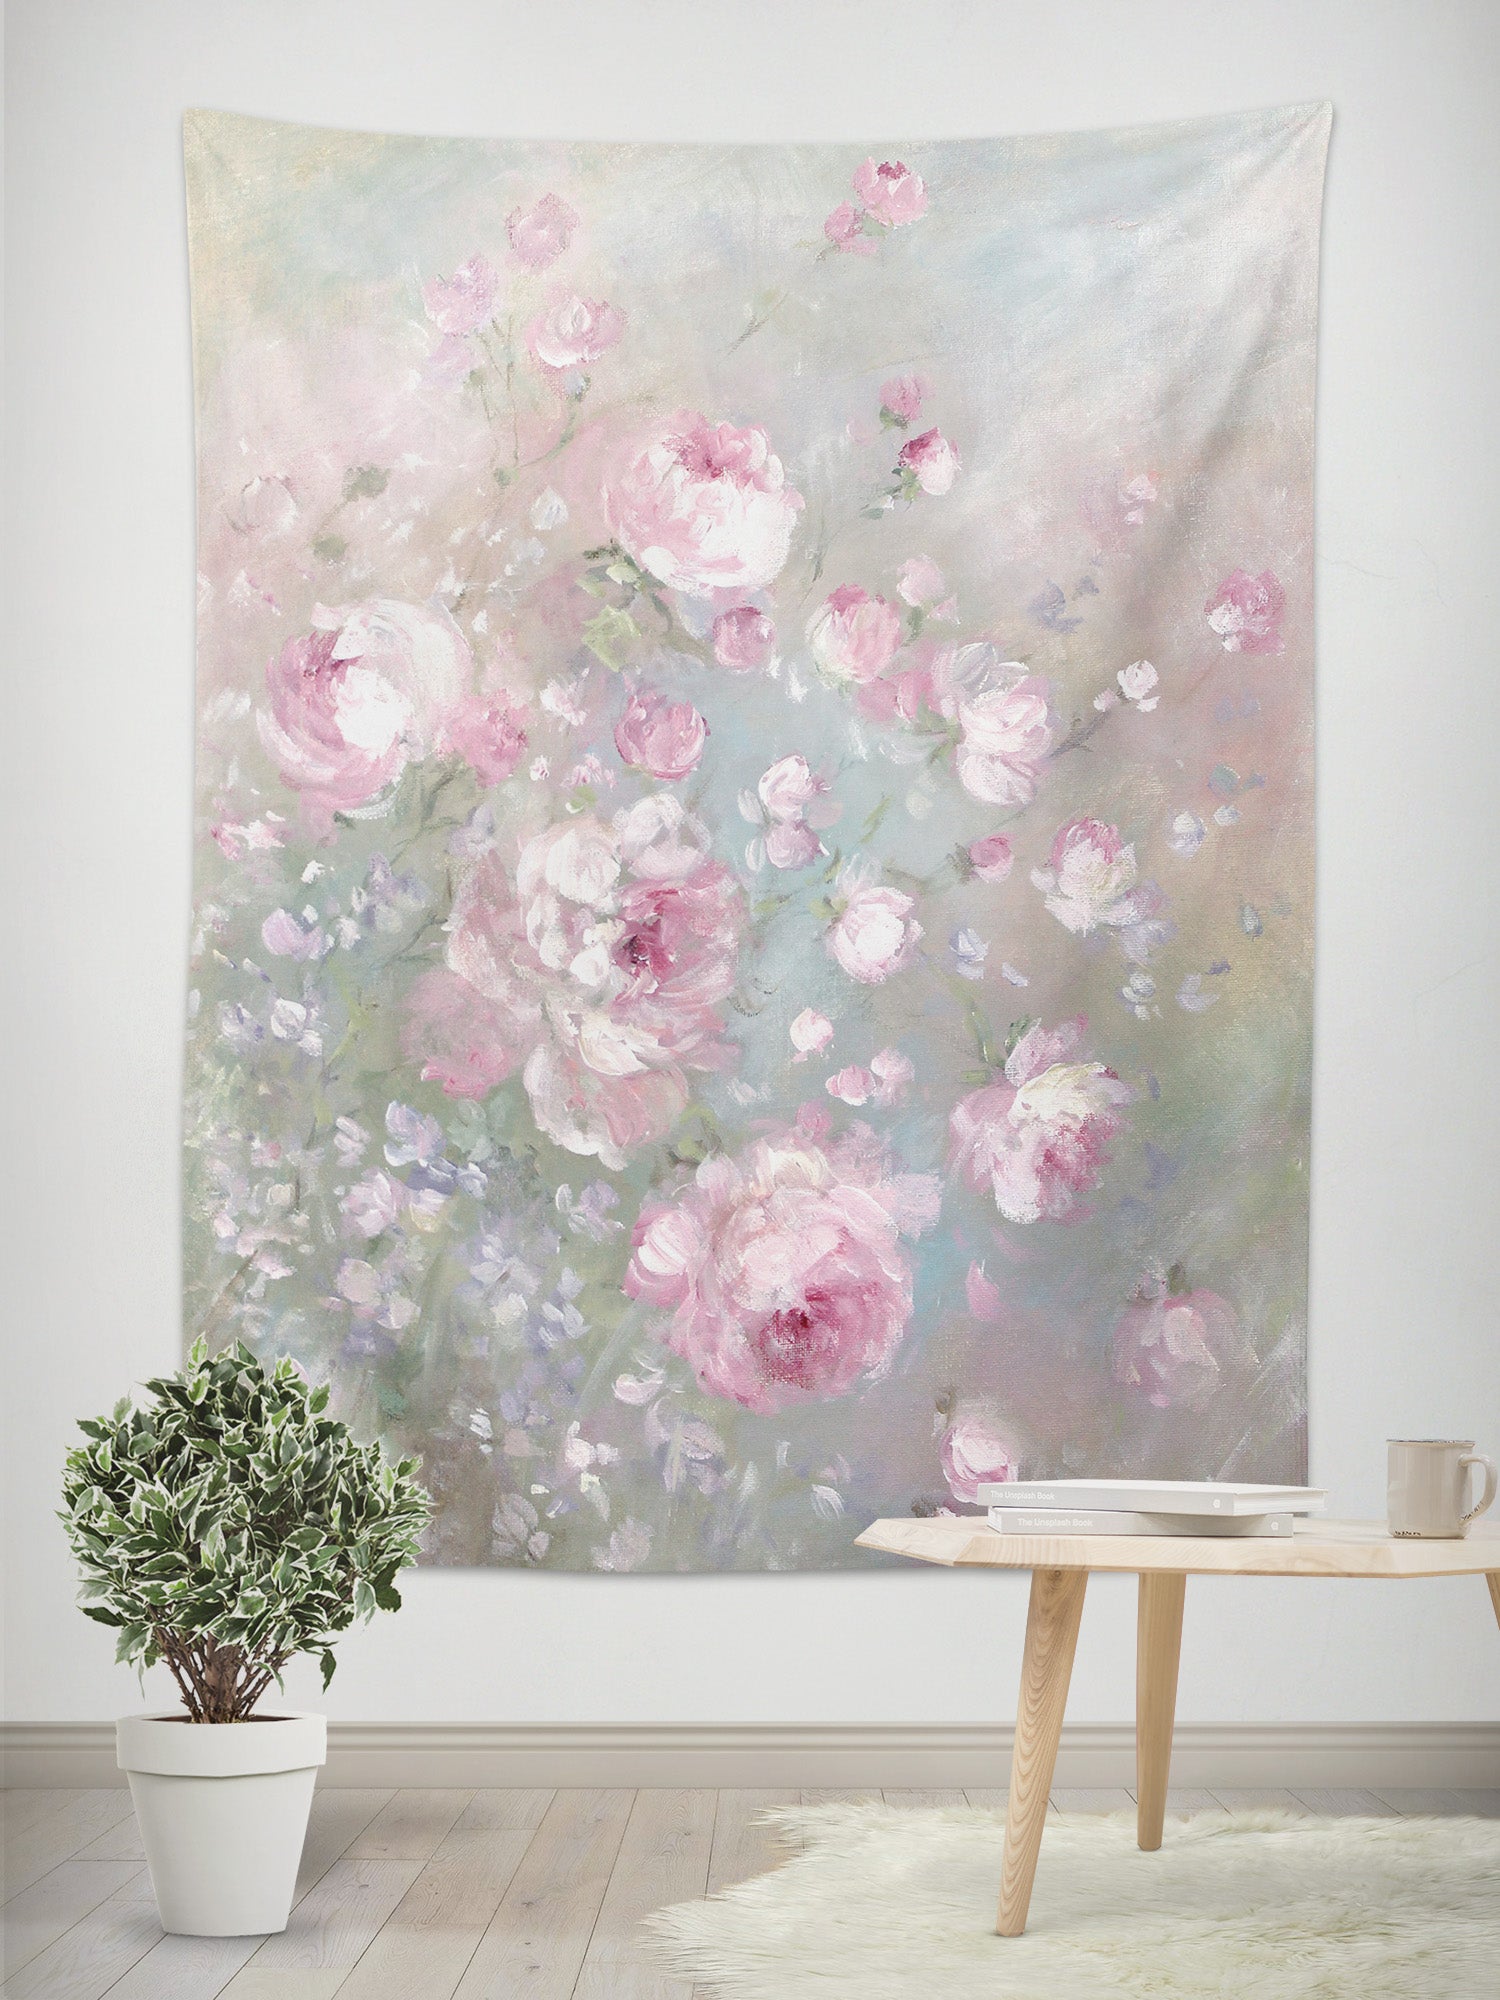 3D Pink Flower 7859 Debi Coules Tapestry Hanging Cloth Hang